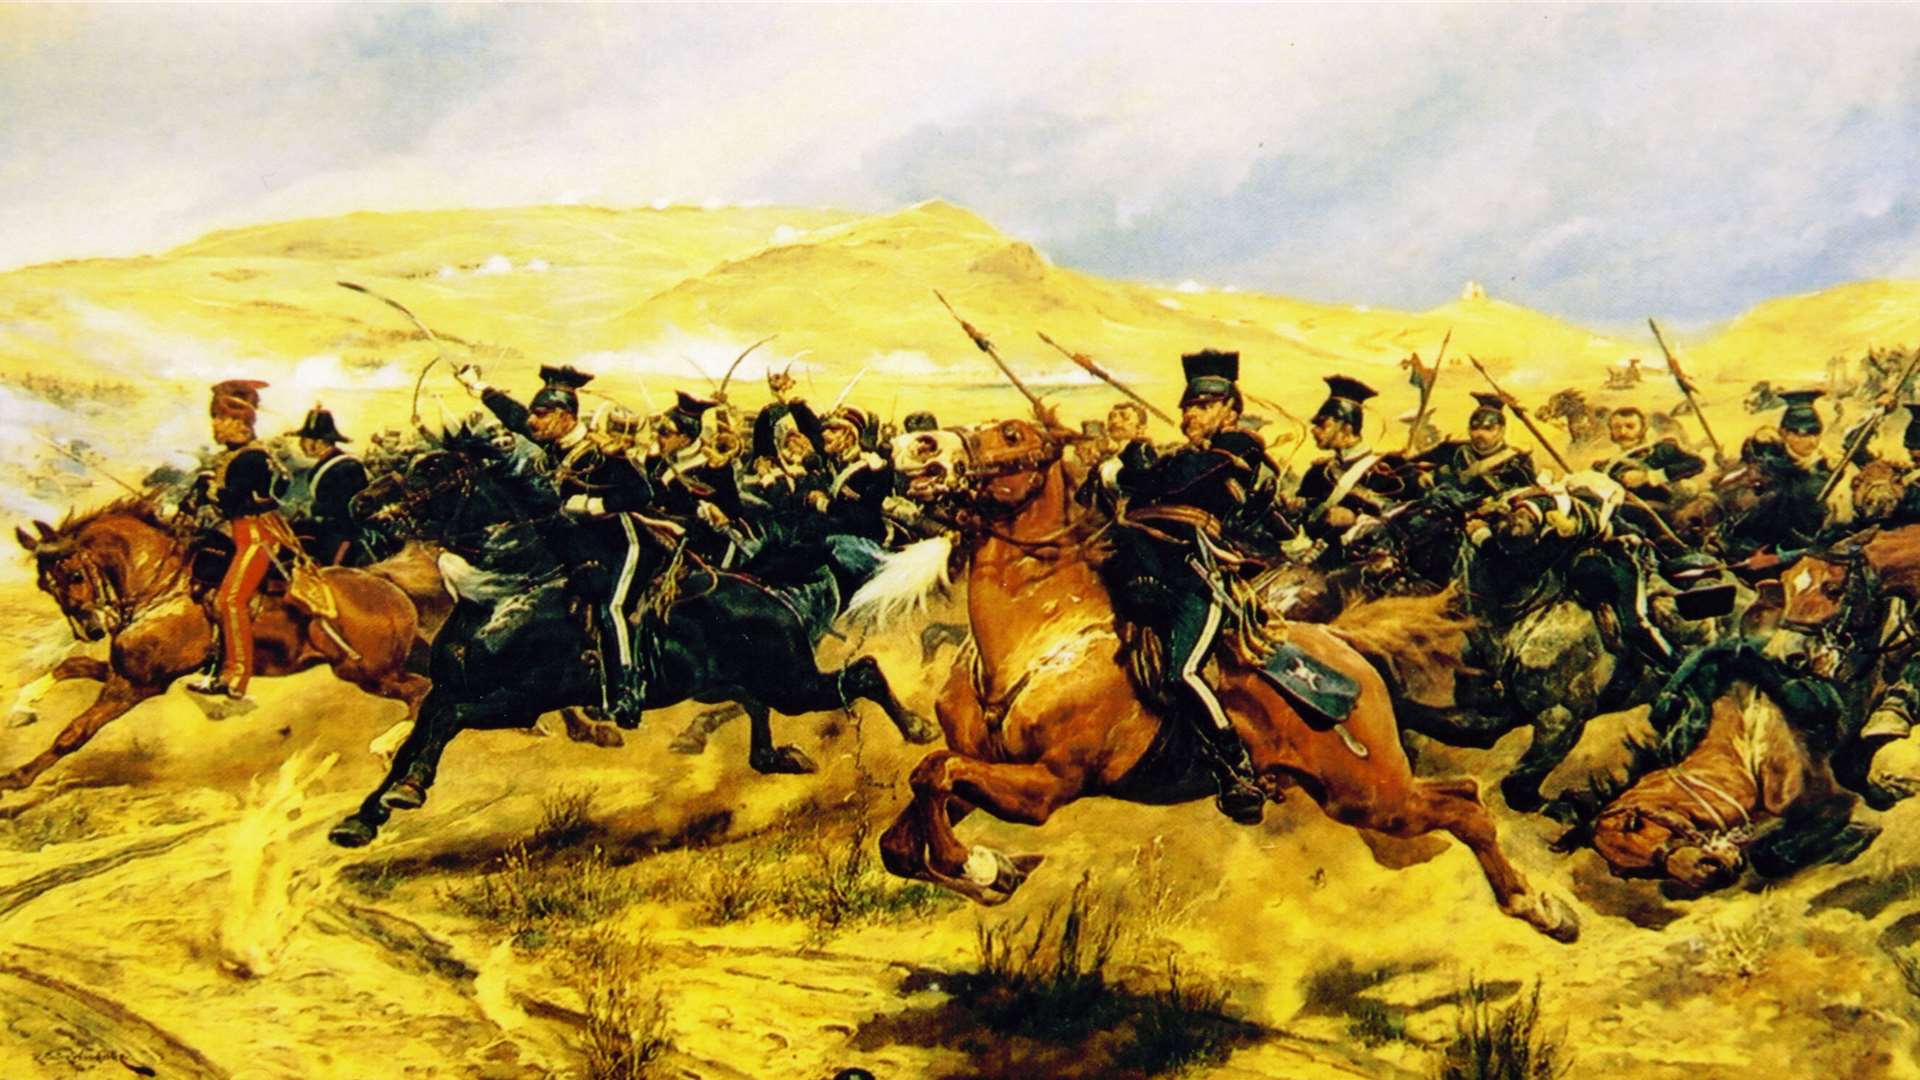 A painting of the charge by Richard Woodville